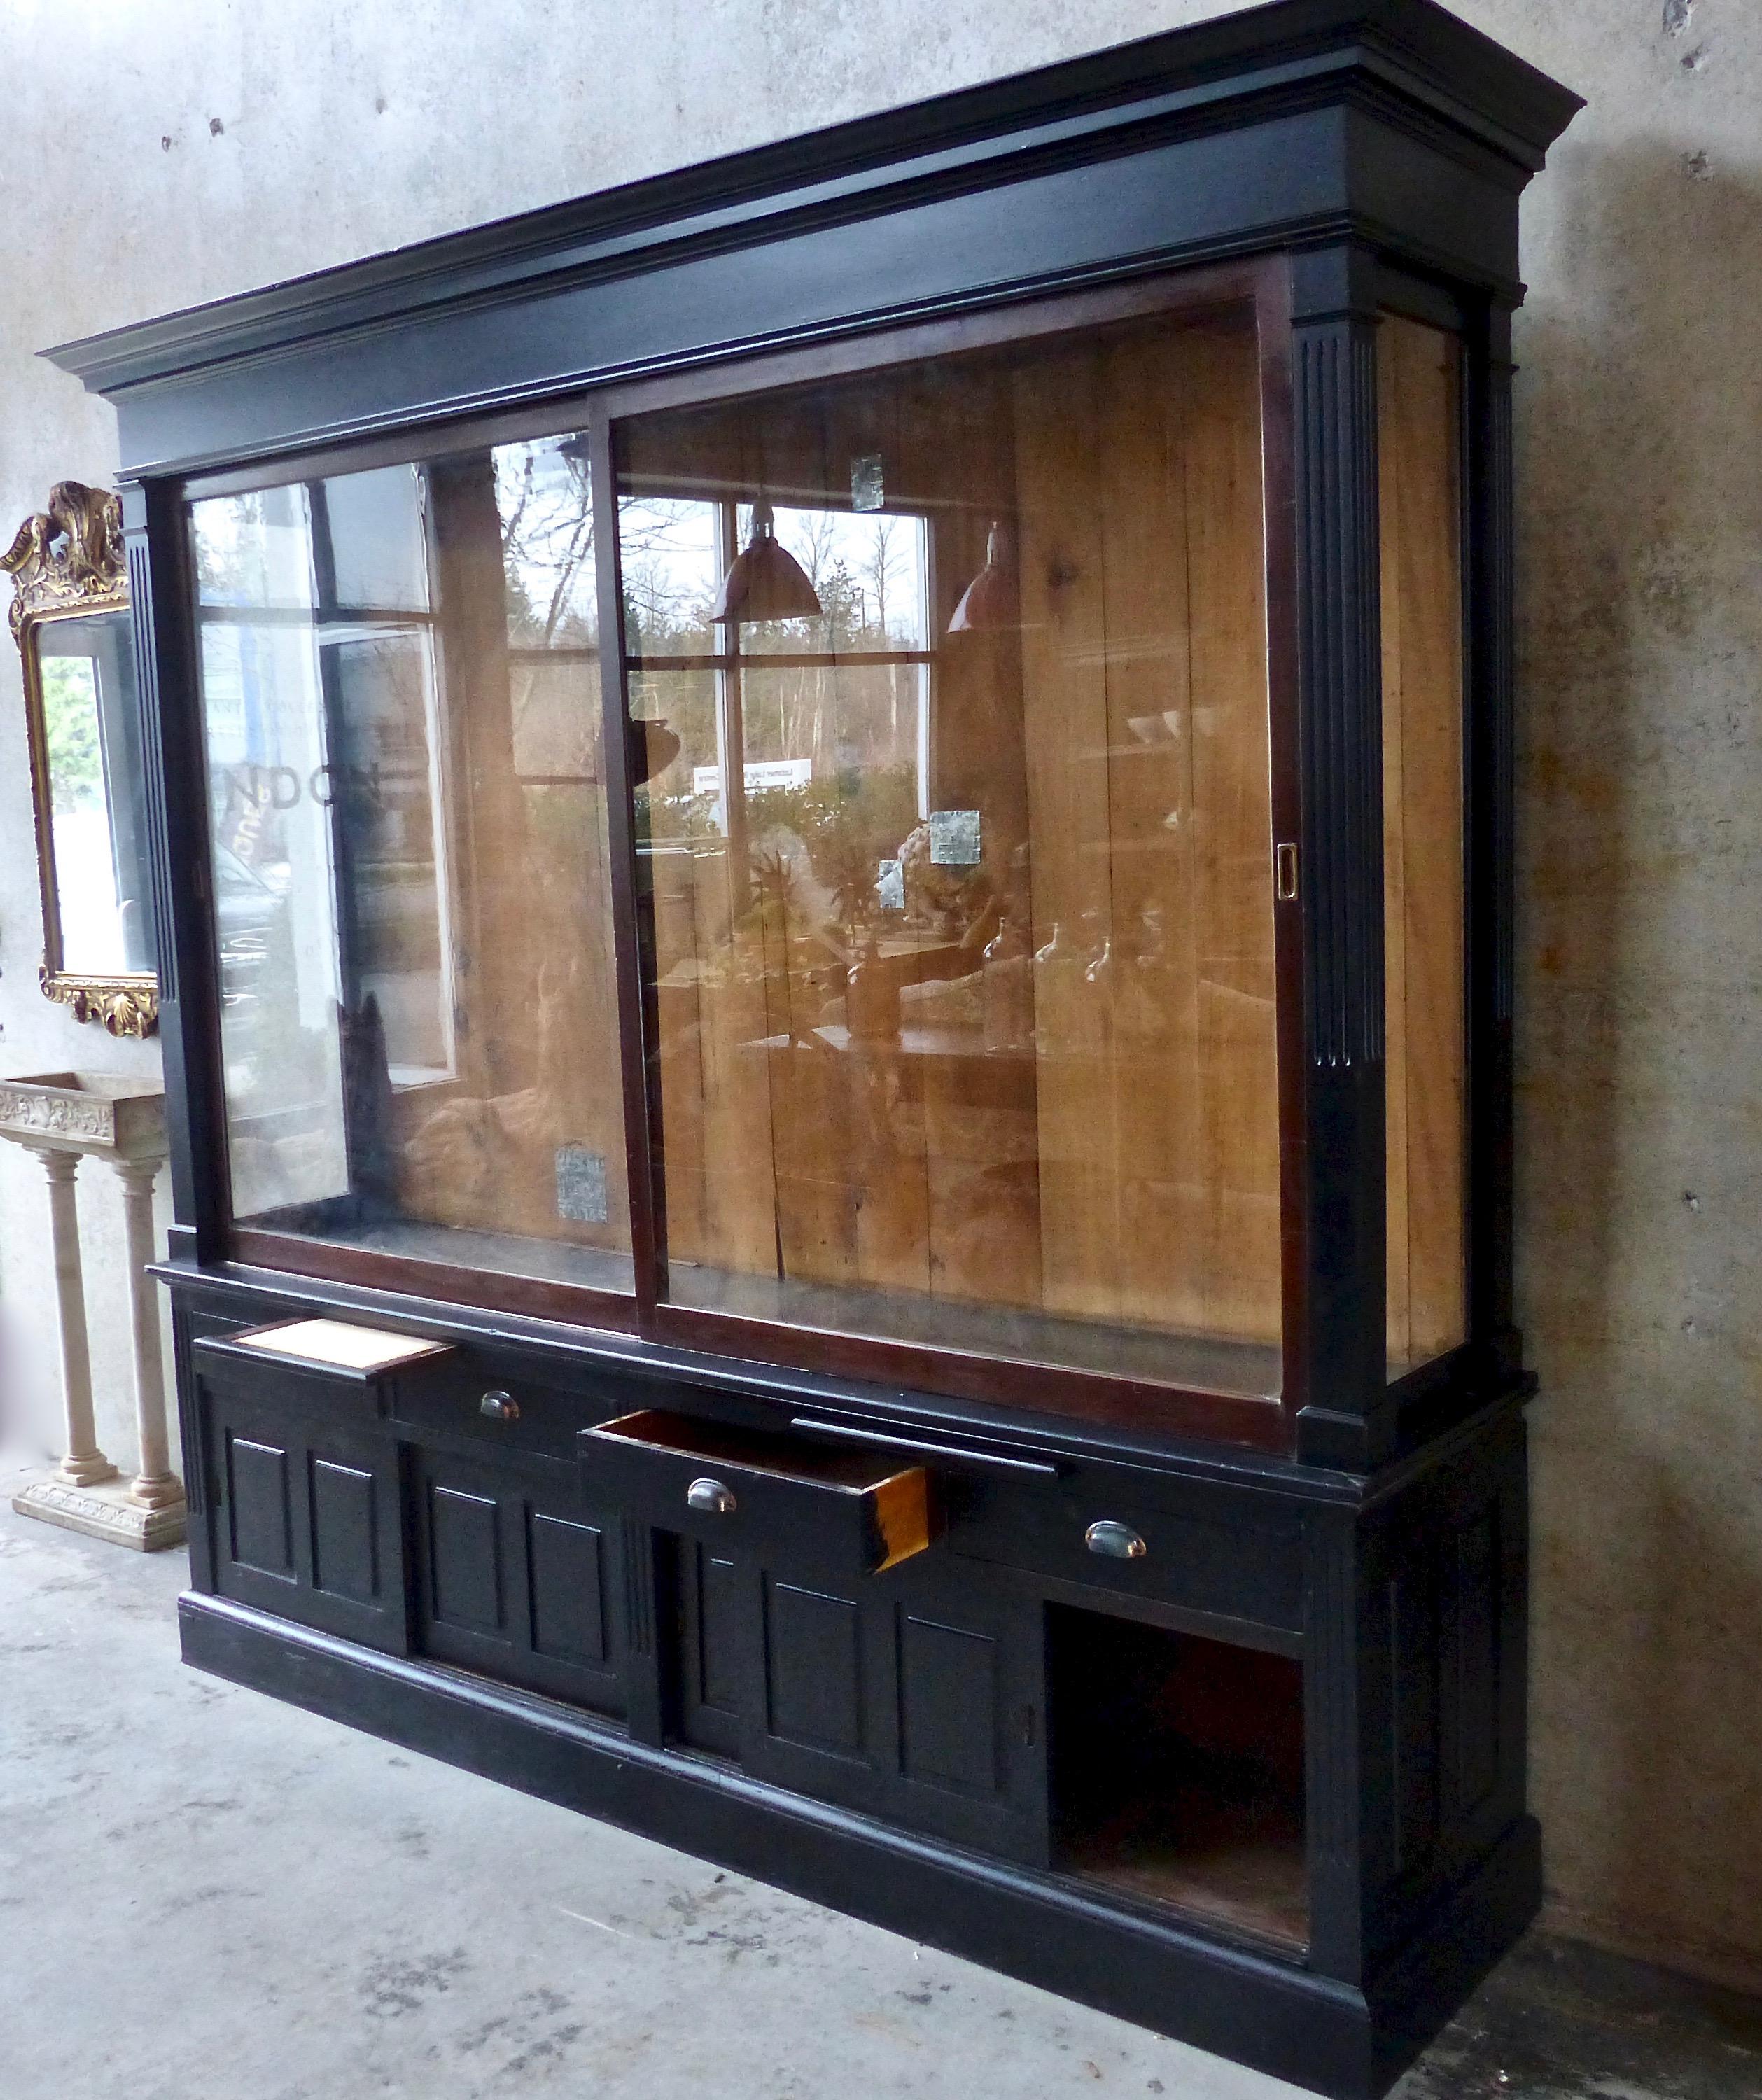 A stately Art Deco era mercantile display cabinet with upper sliding glass doors (approx. 7 H” x 4 W’) plus a lower enclosed section that features shelves, four drawers, and two pull-out ‘desktops’. Brass hardware and an elegant black finish. First